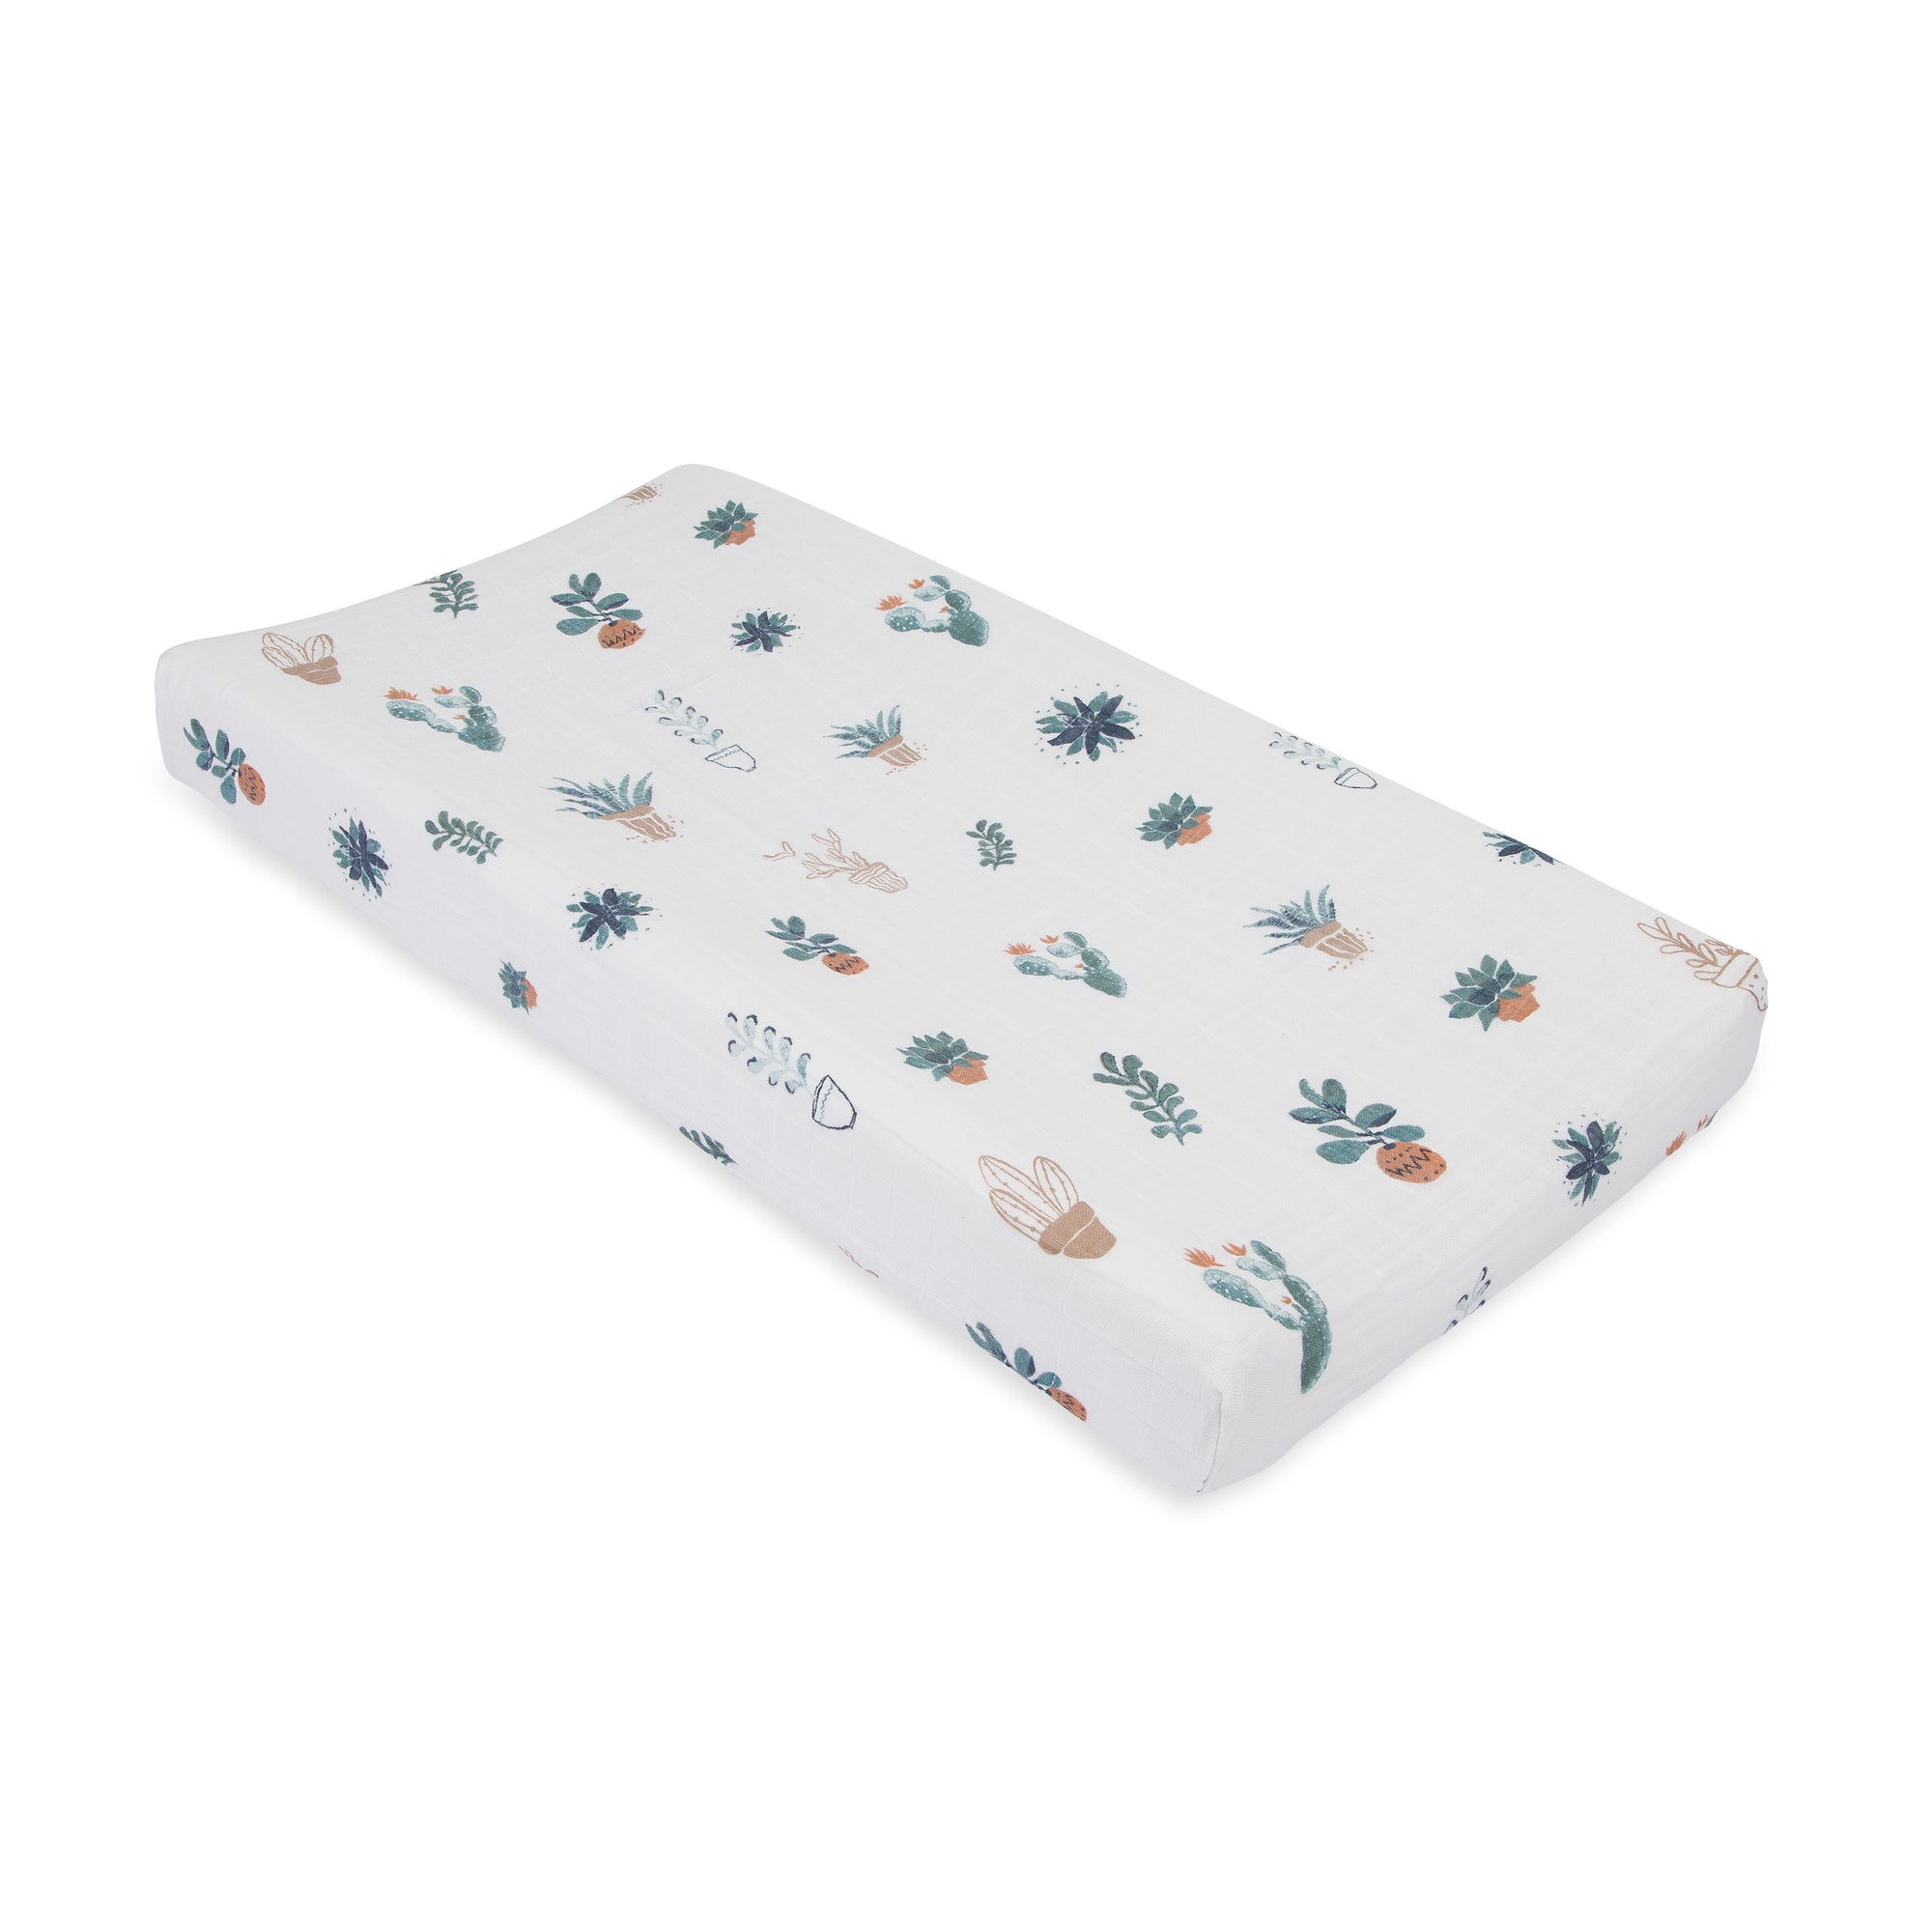 Little Unicorn Cotton Muslin Changing Pad Cover / Prickle Pots